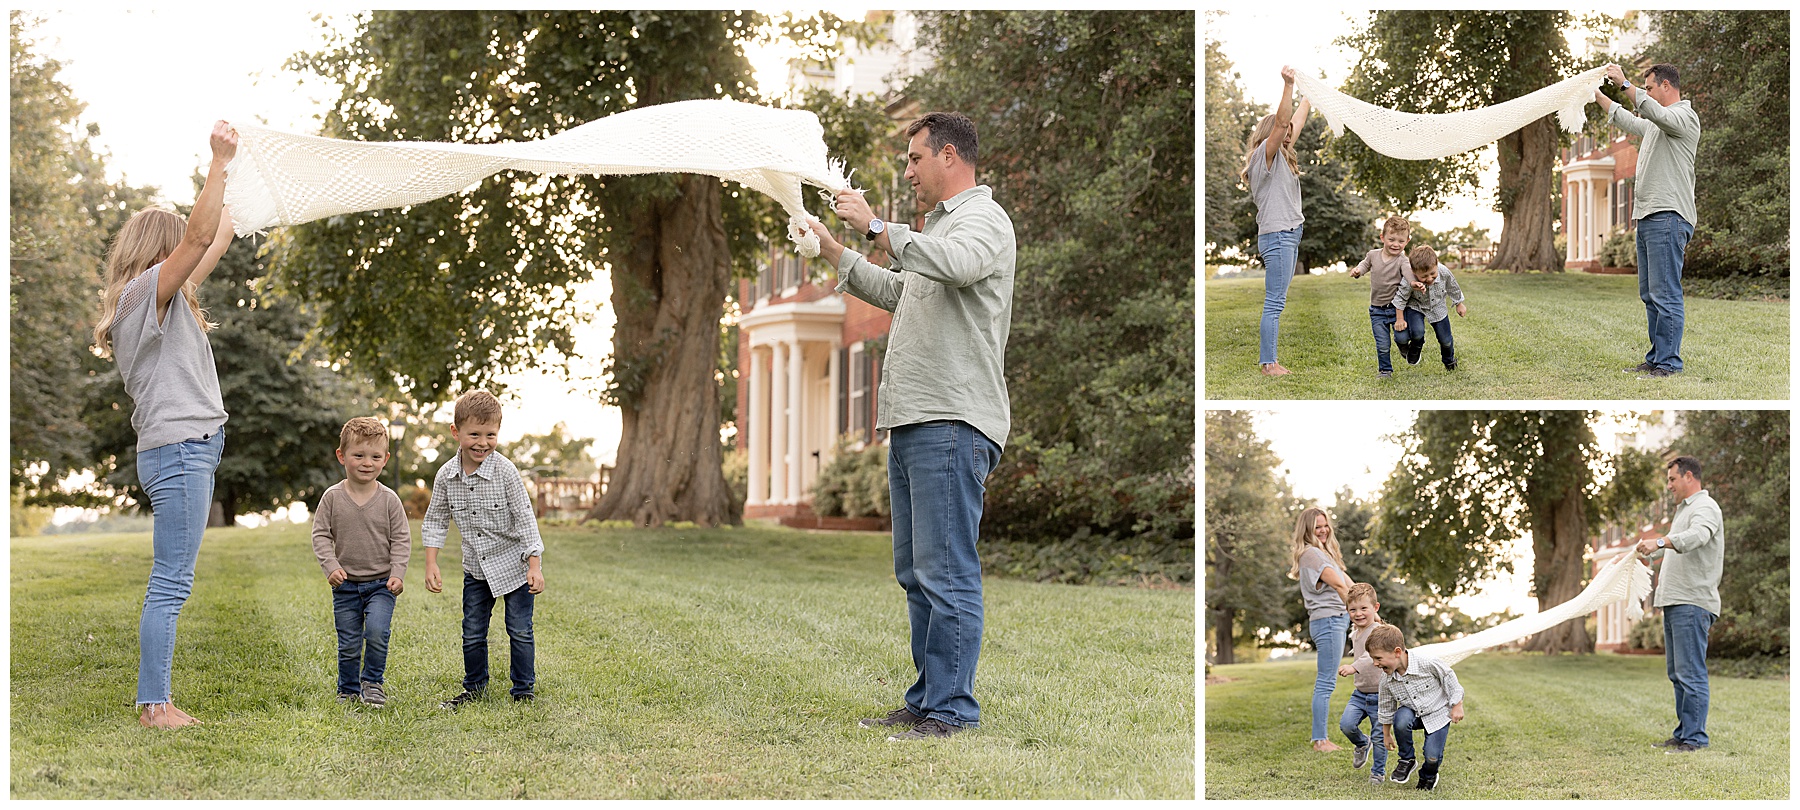 family plays with white blanket during photo session - photographer's busy season